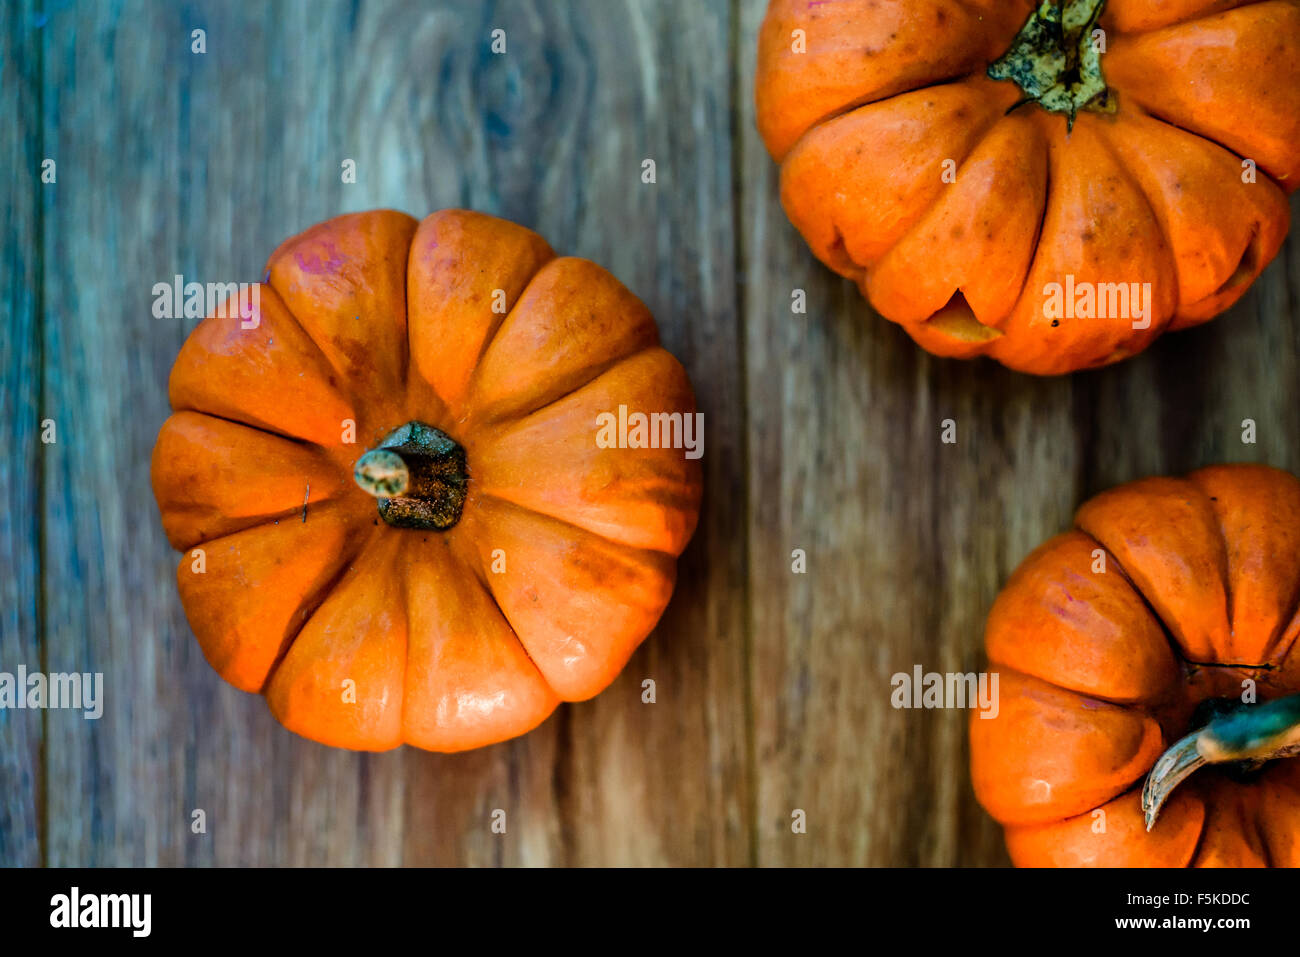 Pumpkins on the wooden background Stock Photo